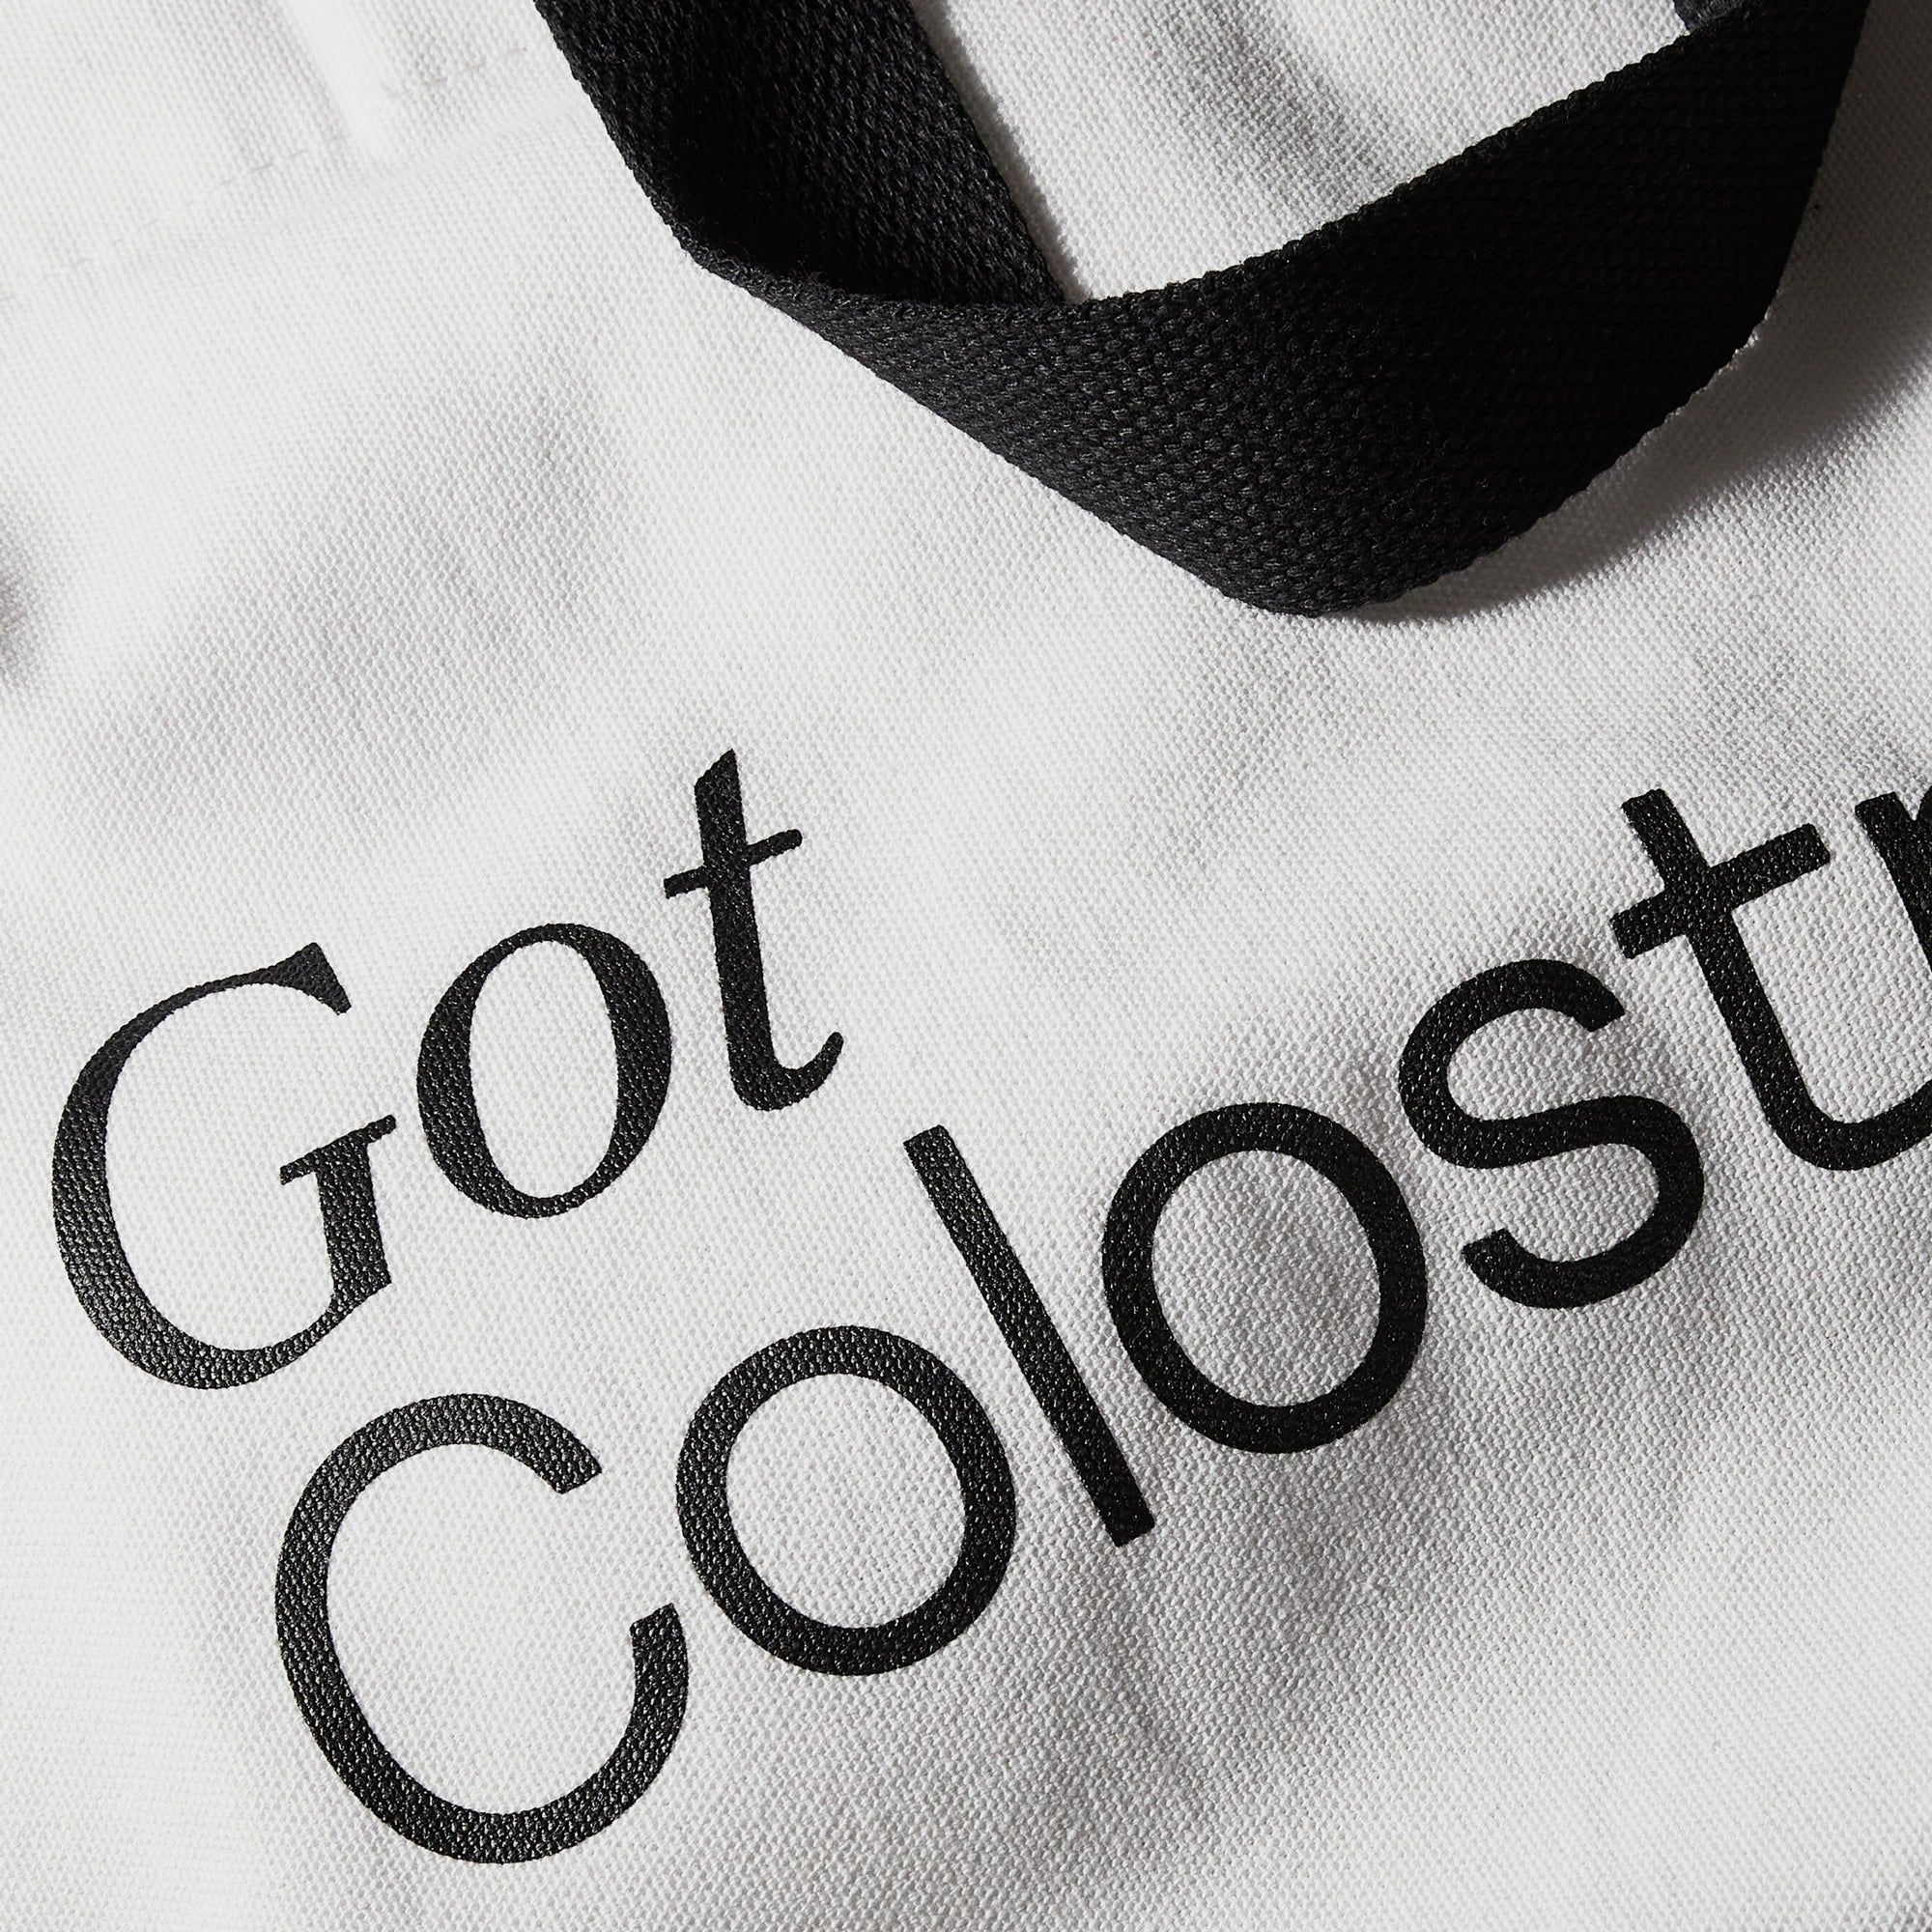 Close detail shot of the back of the bag on the text “Got Colostrum”